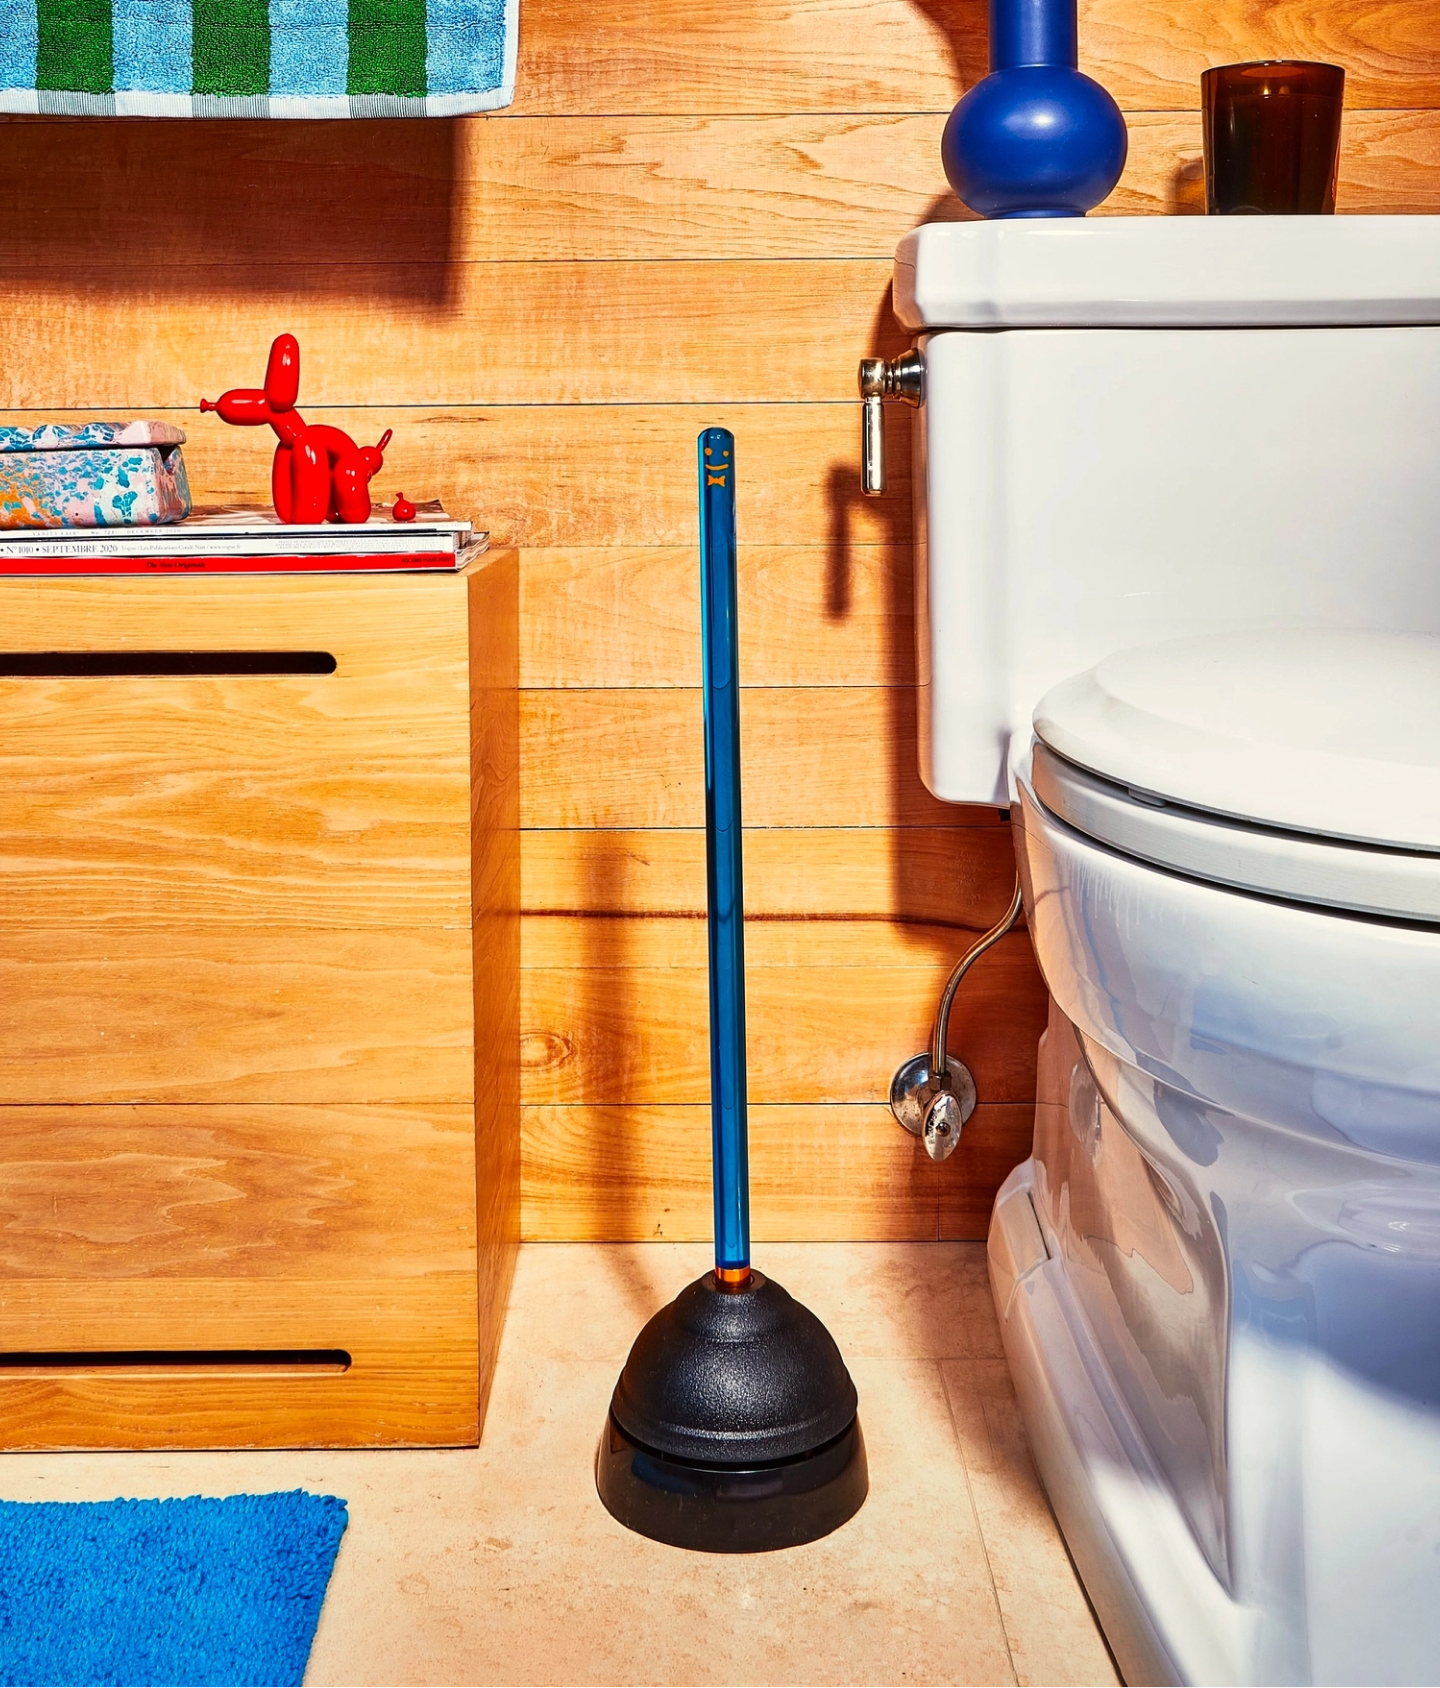 single blue staff plunger in situ next to toilet and cabinet